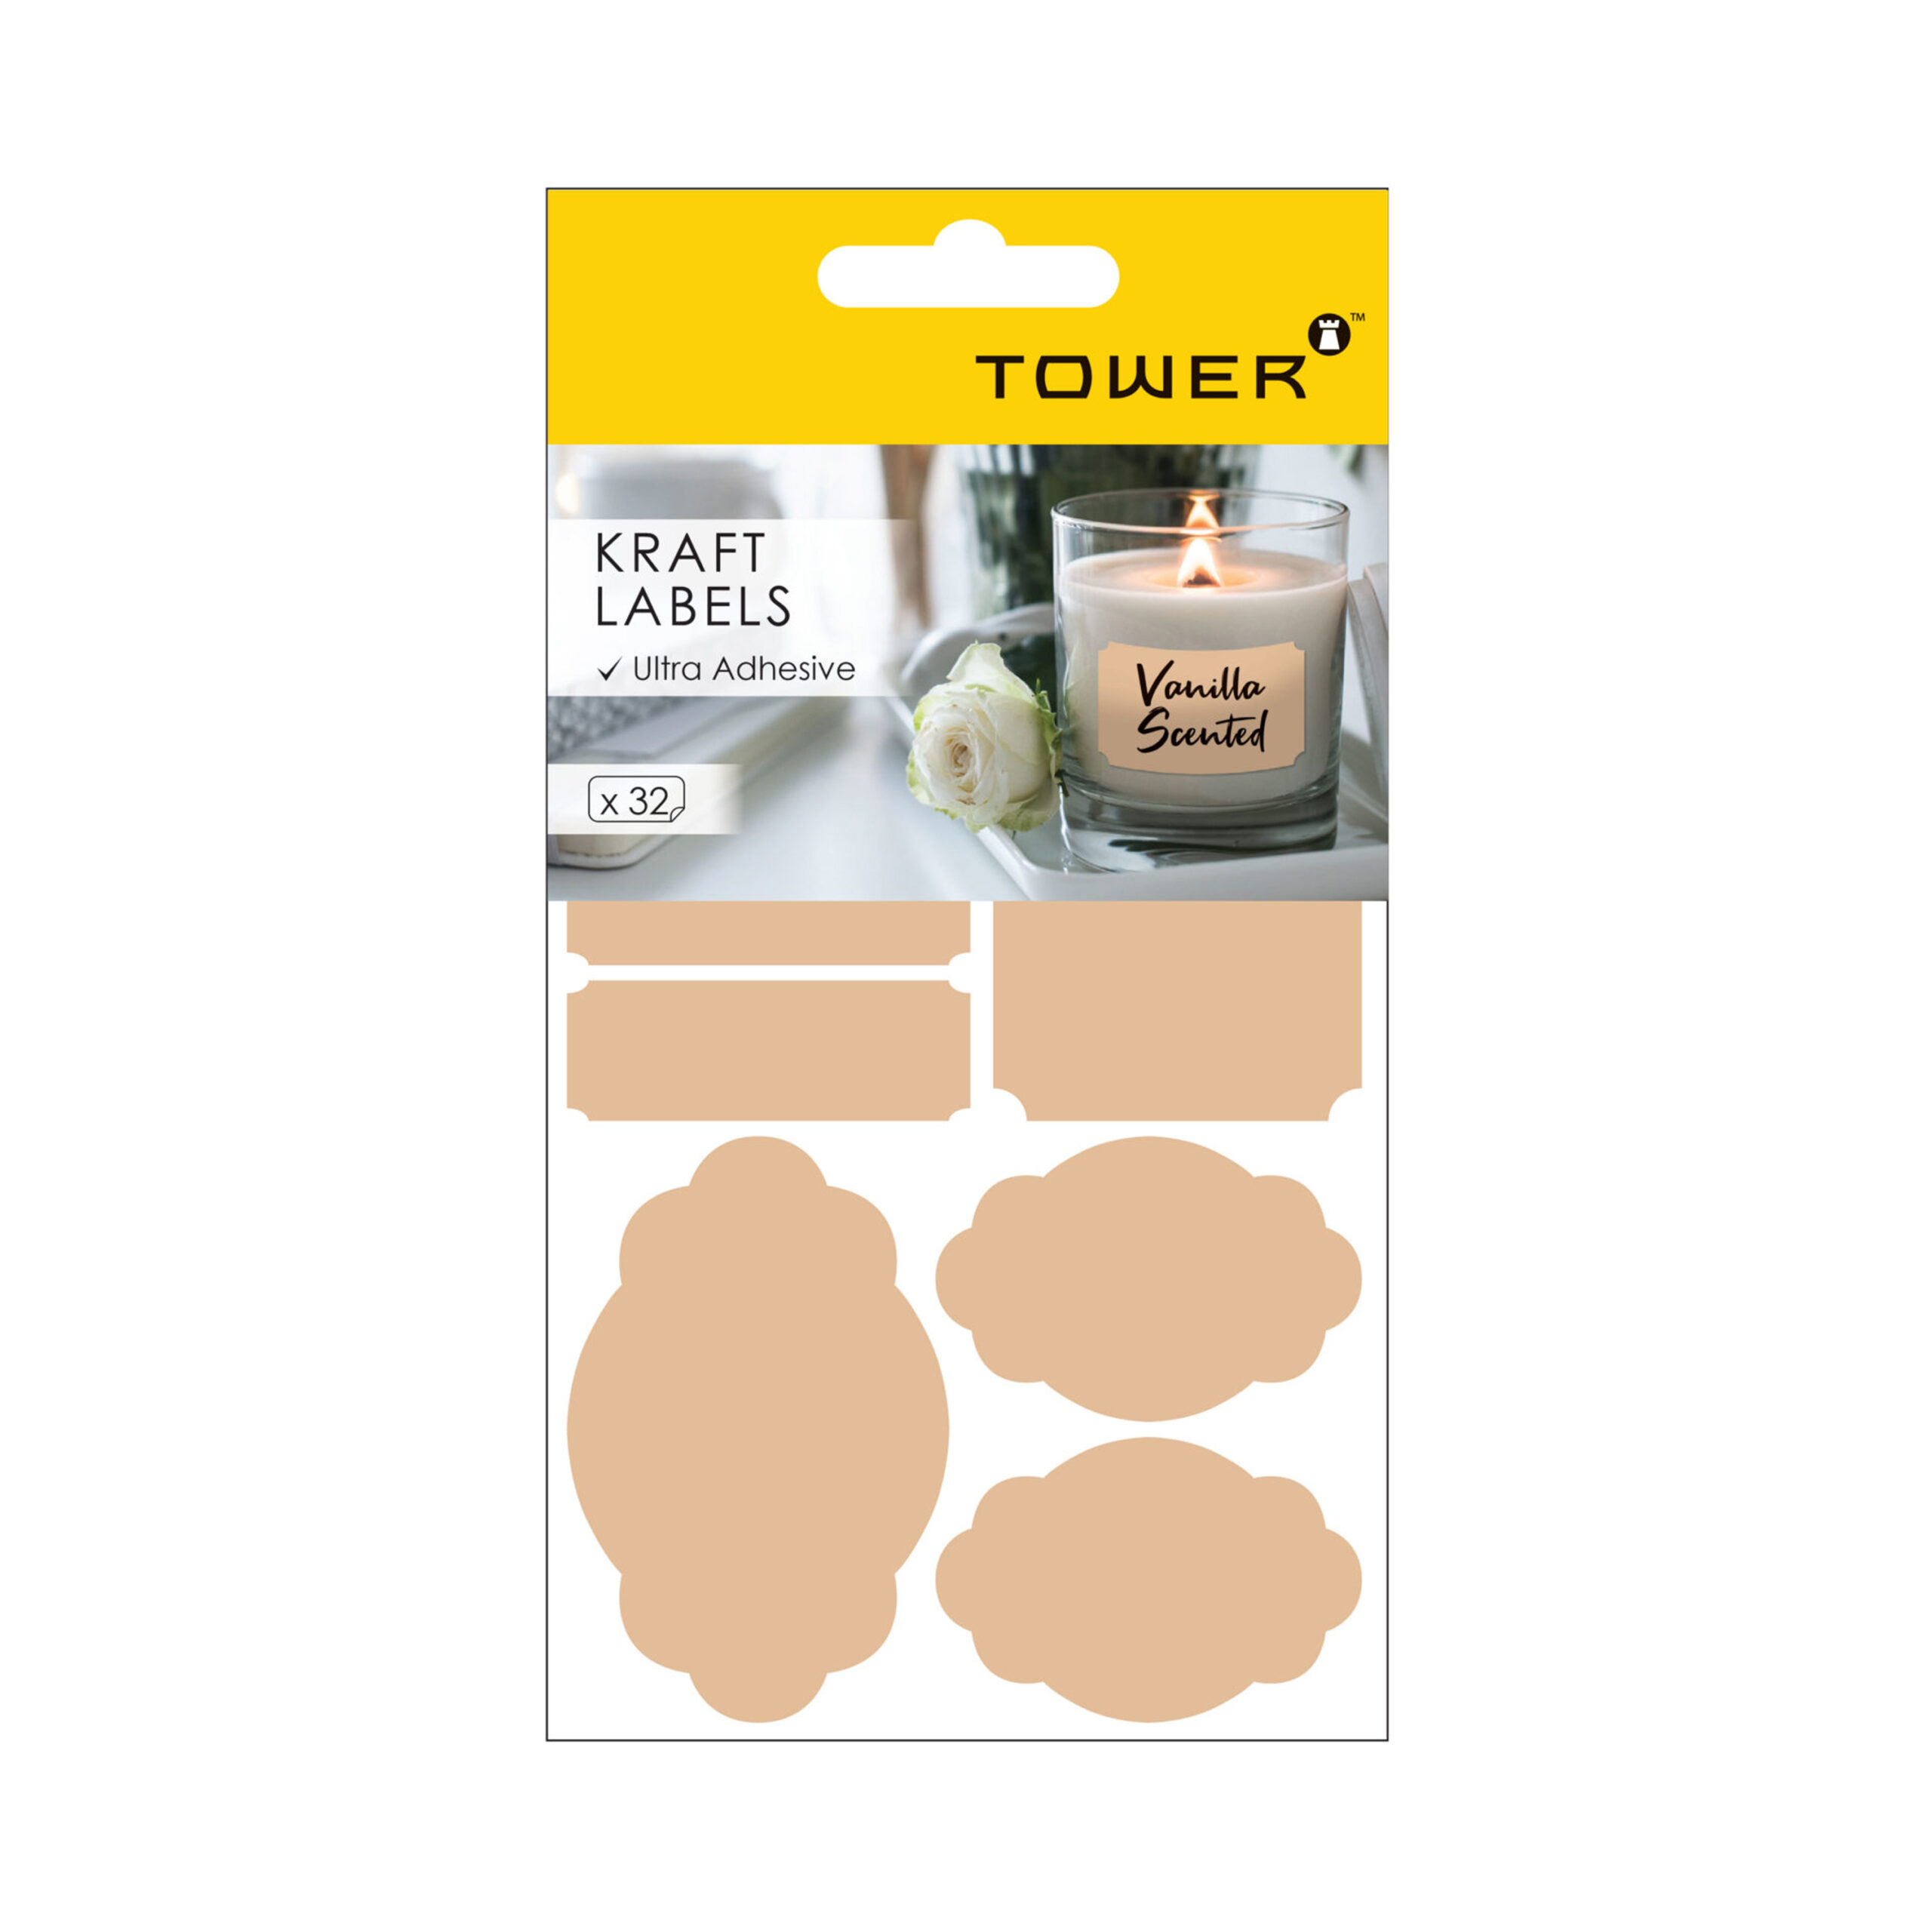 TOWER  ULTRA
ADHESIVE KRAFT
LABELS  (32
LABELS)